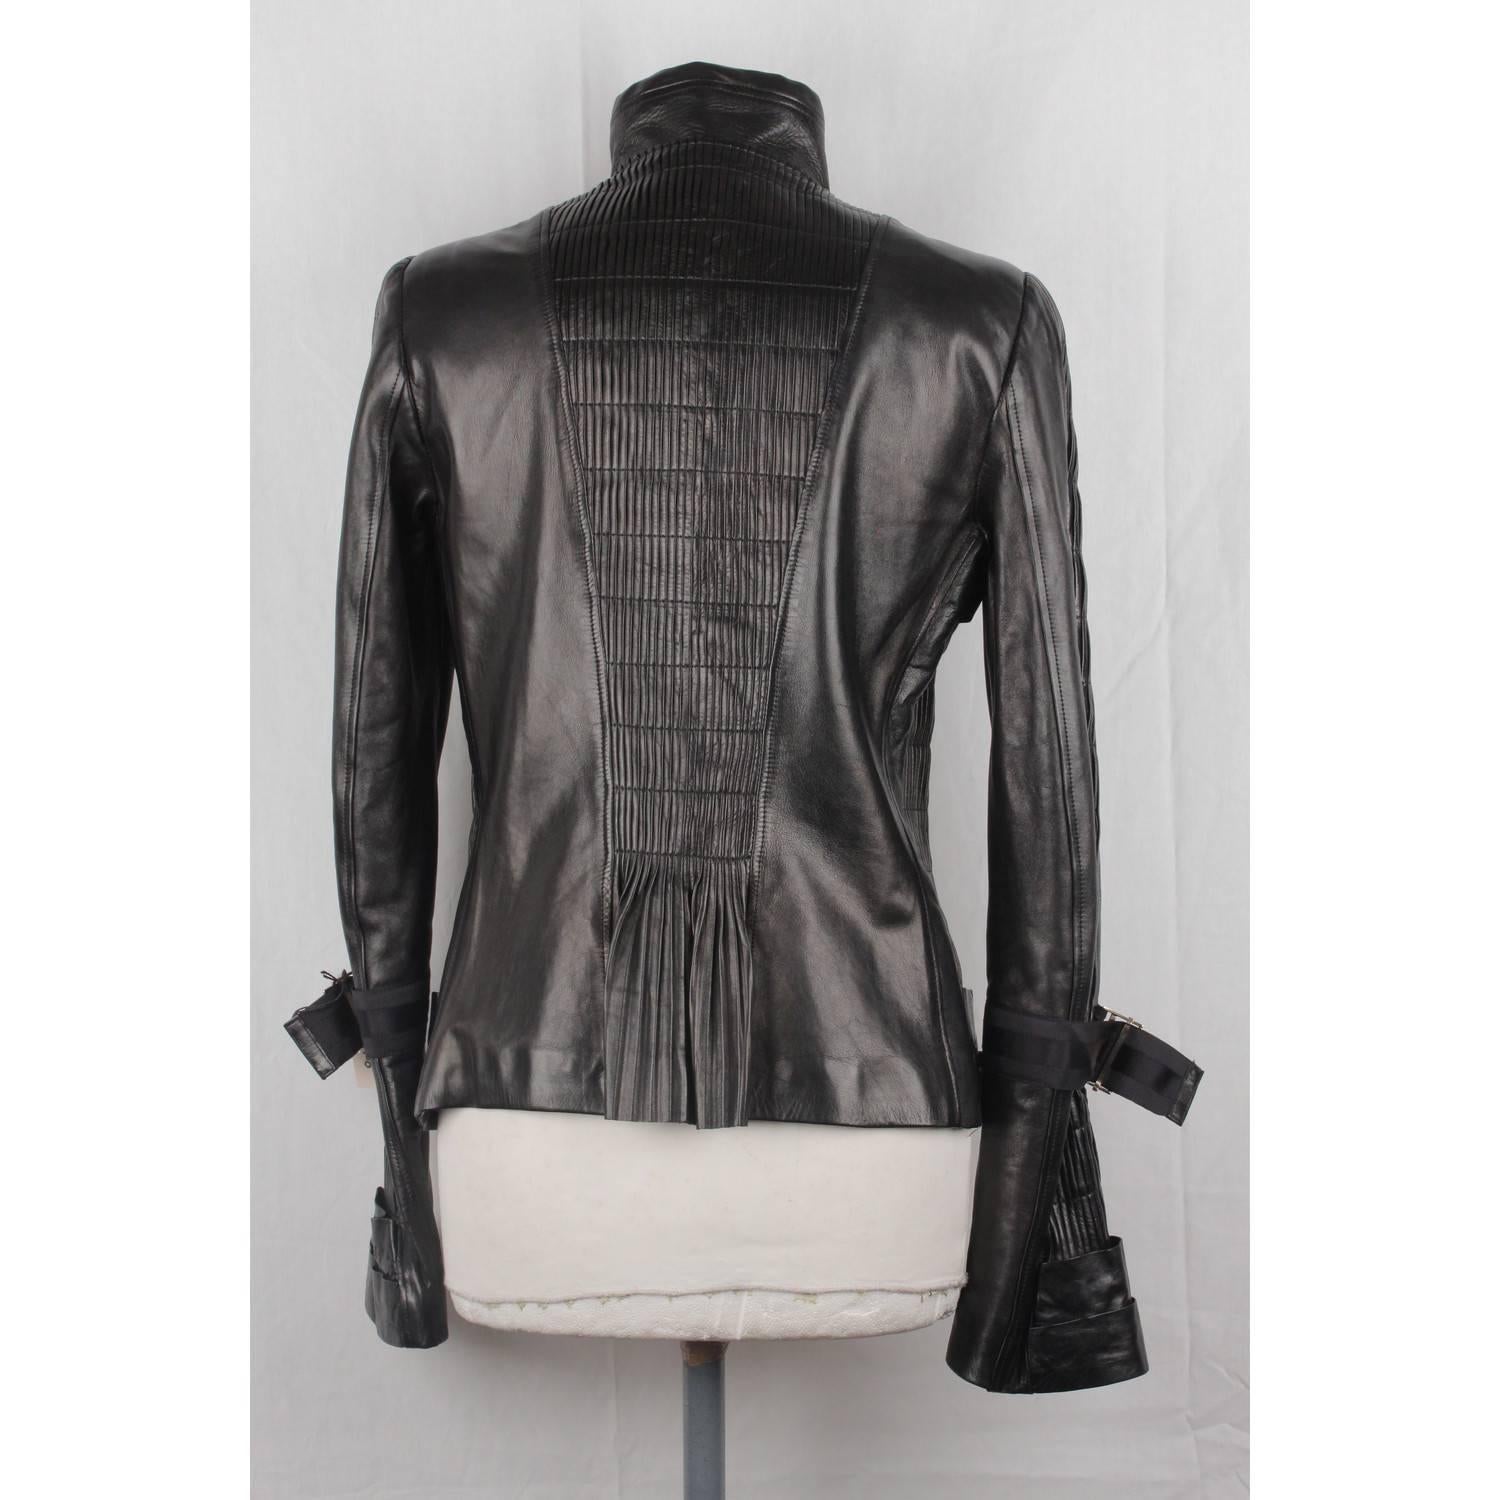 GUCCI Black Leather BIKER JACKET with Pintucked Panels 2